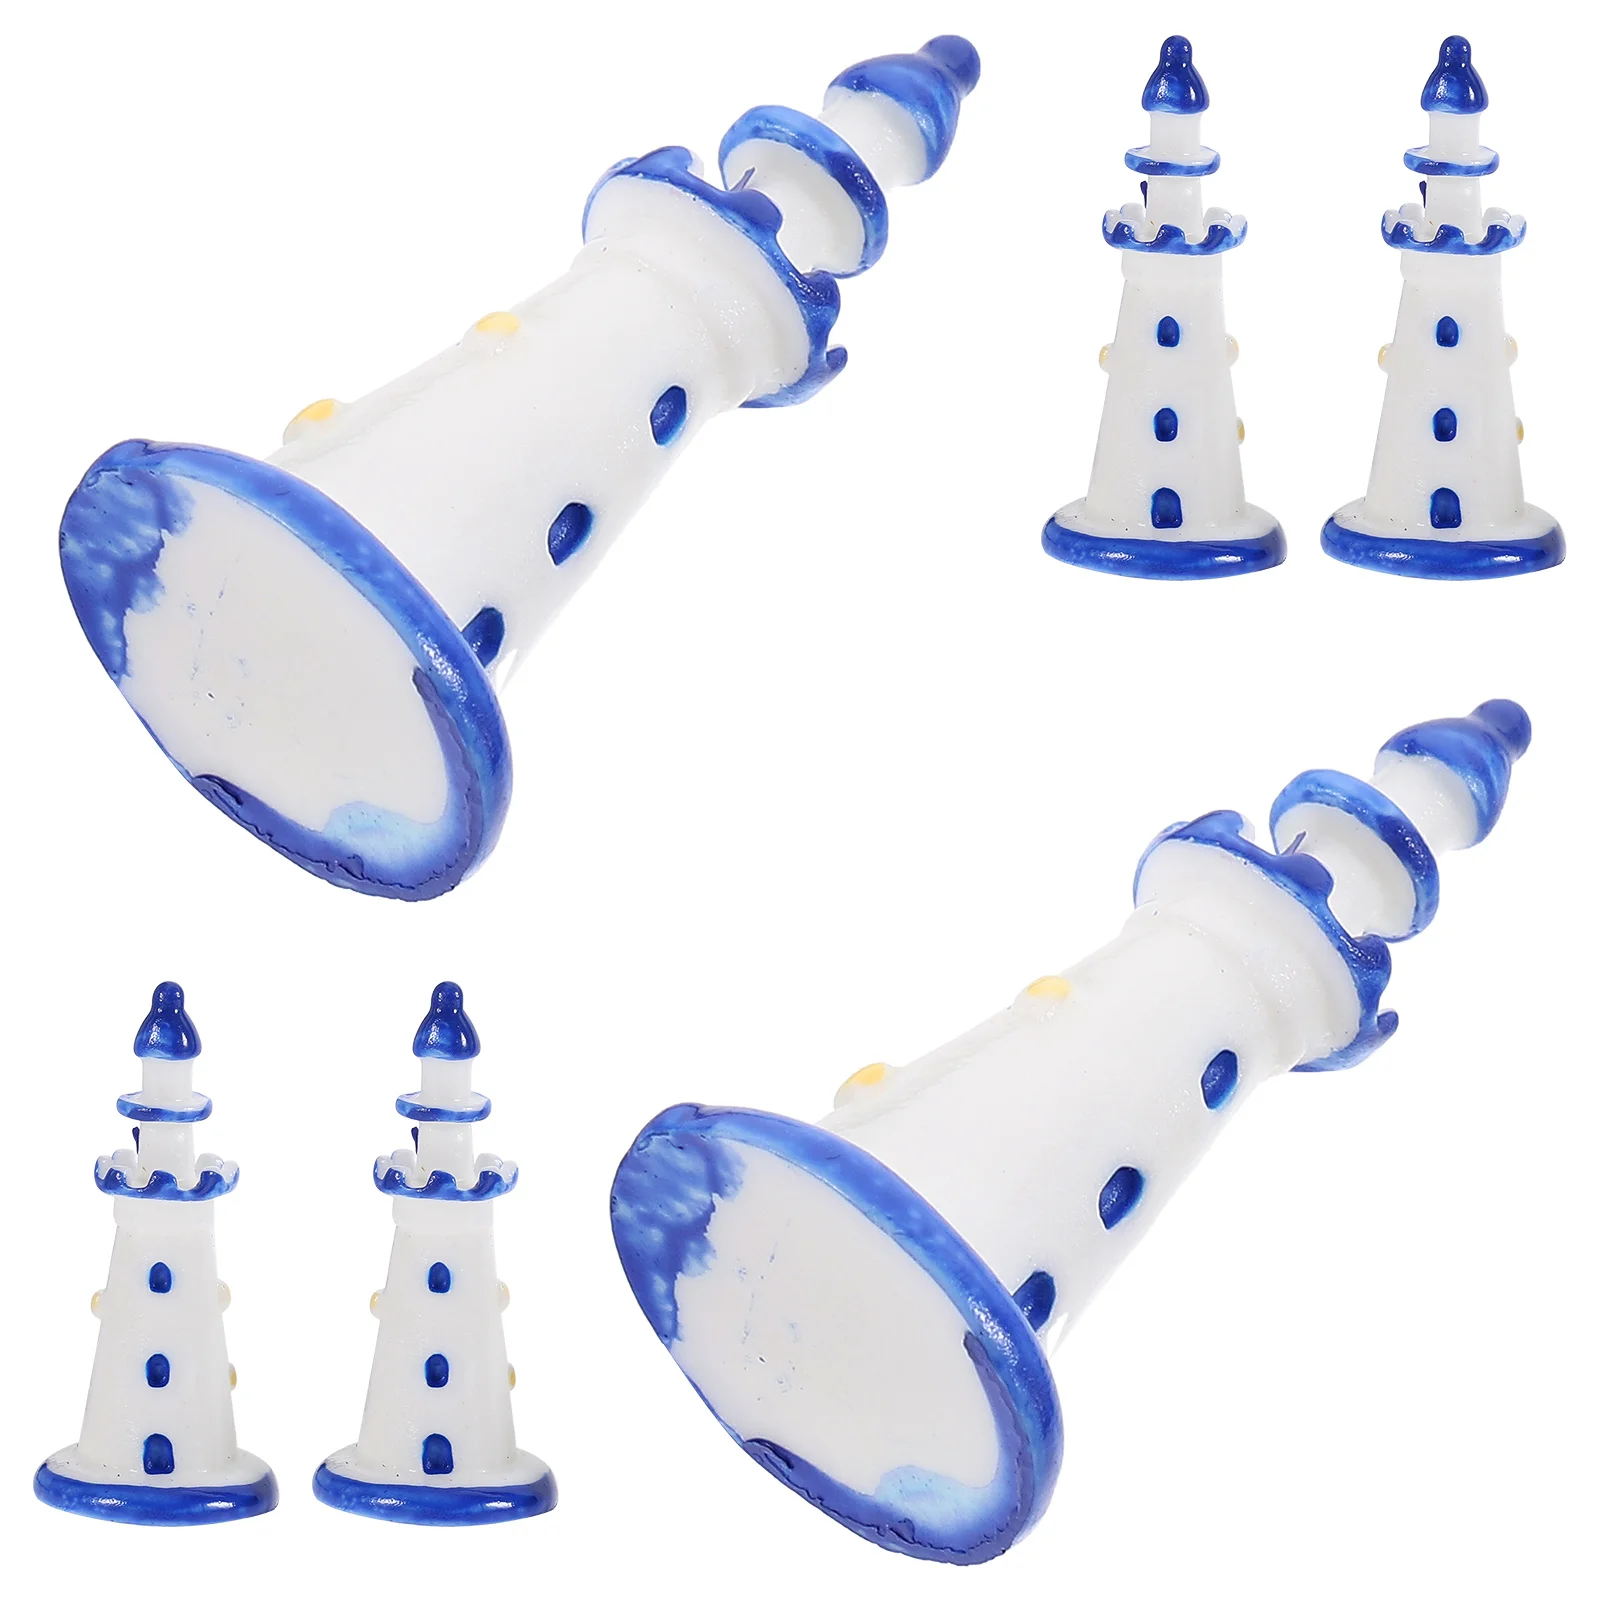 10 Pcs Household Mini Lighthouse Home Decor Scenery Decorations Resin Photography Props newborn baby photography props handmade wool mini telephone decorations posing beanbag side table for studio shooting photo prop